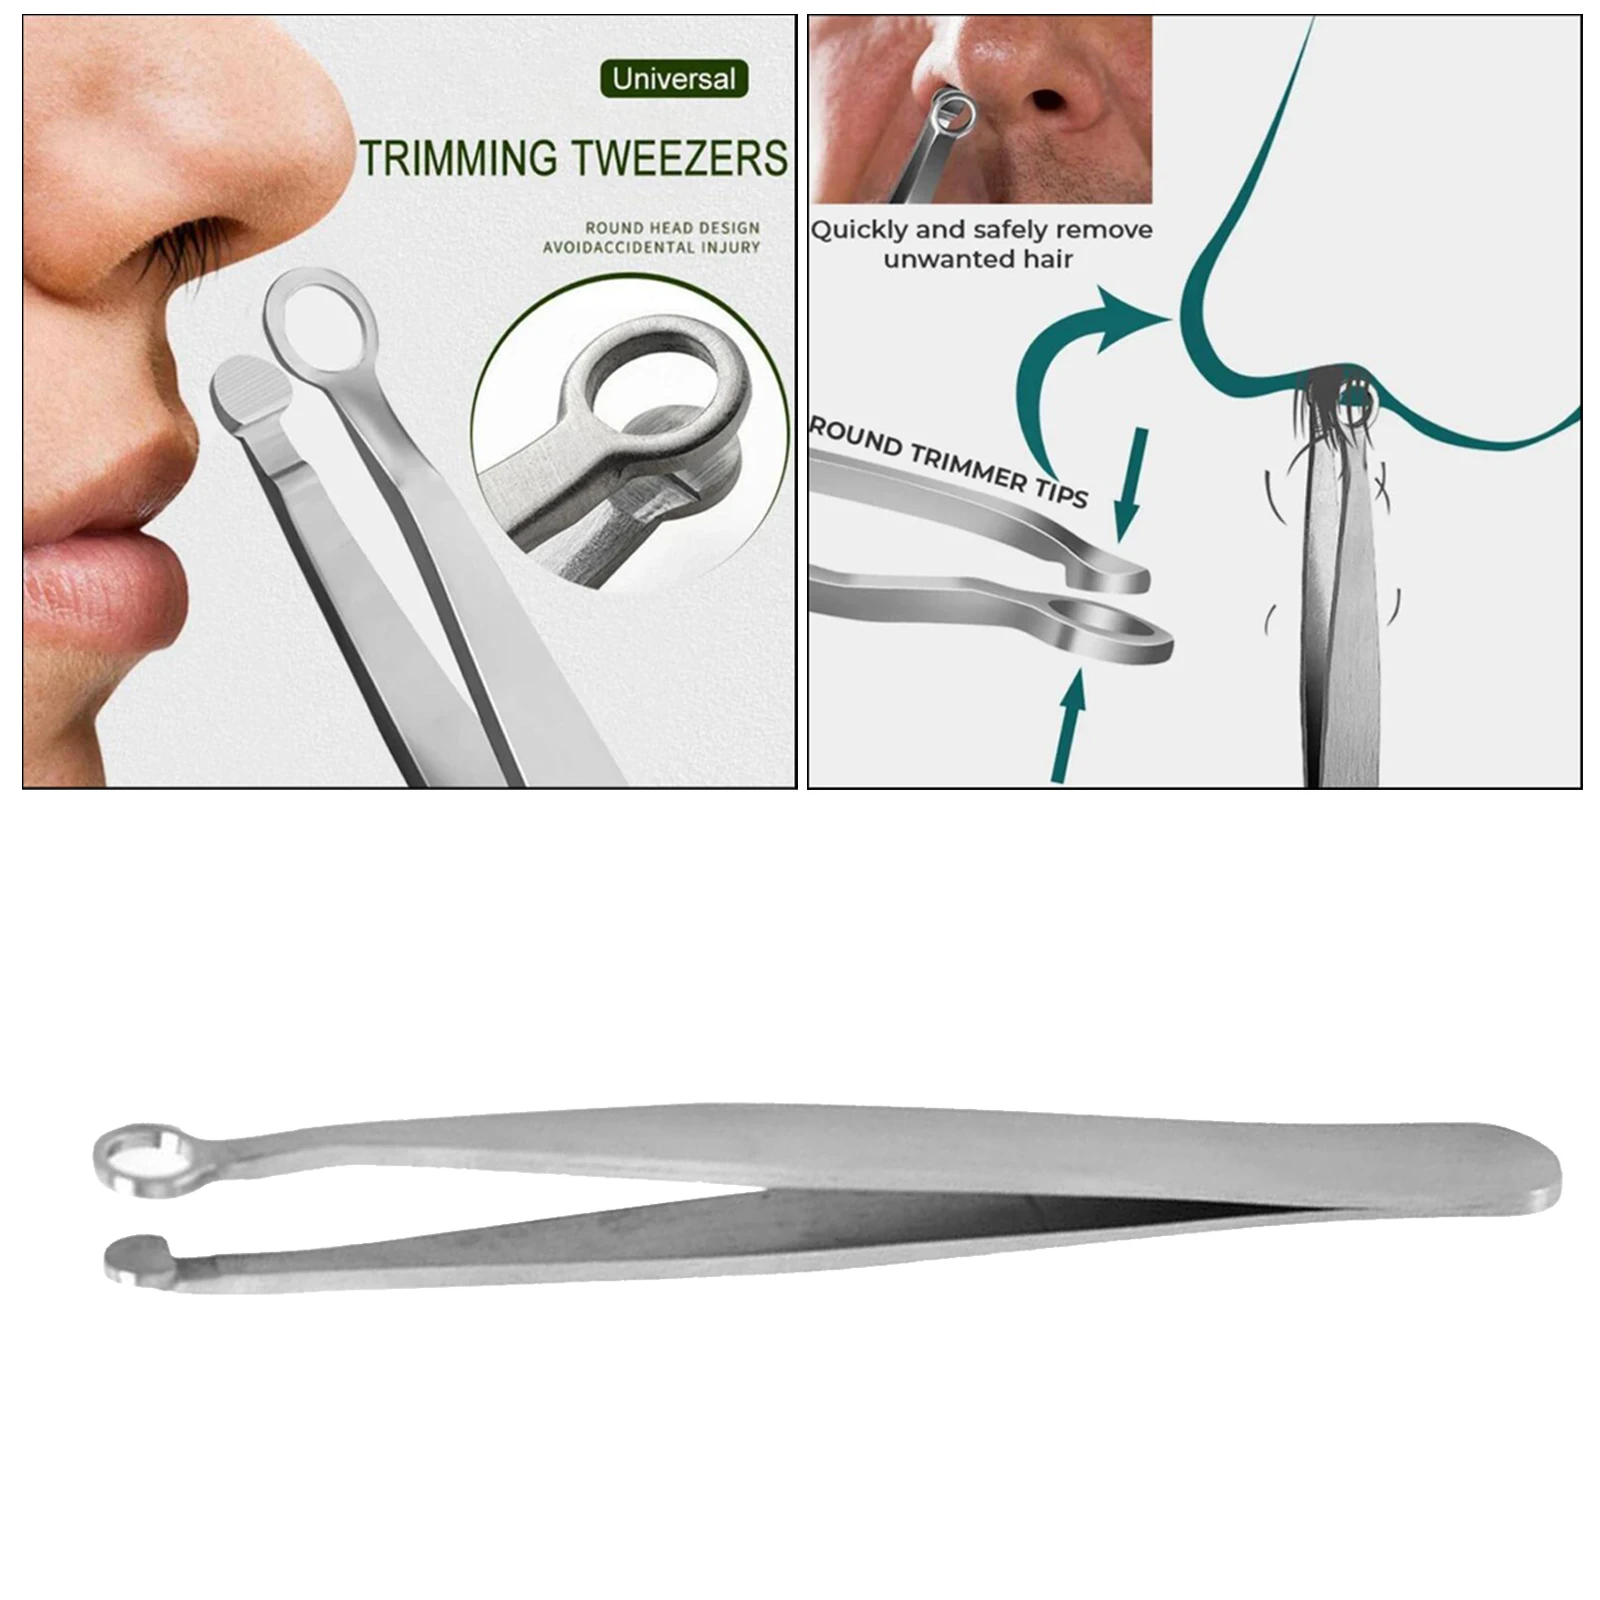 Stainless Steel Nose Hair Trimming Tweezers Safe Trimmer Round Tip Design Eyebrow Perfect Steel Nose Hair Removal Trimming